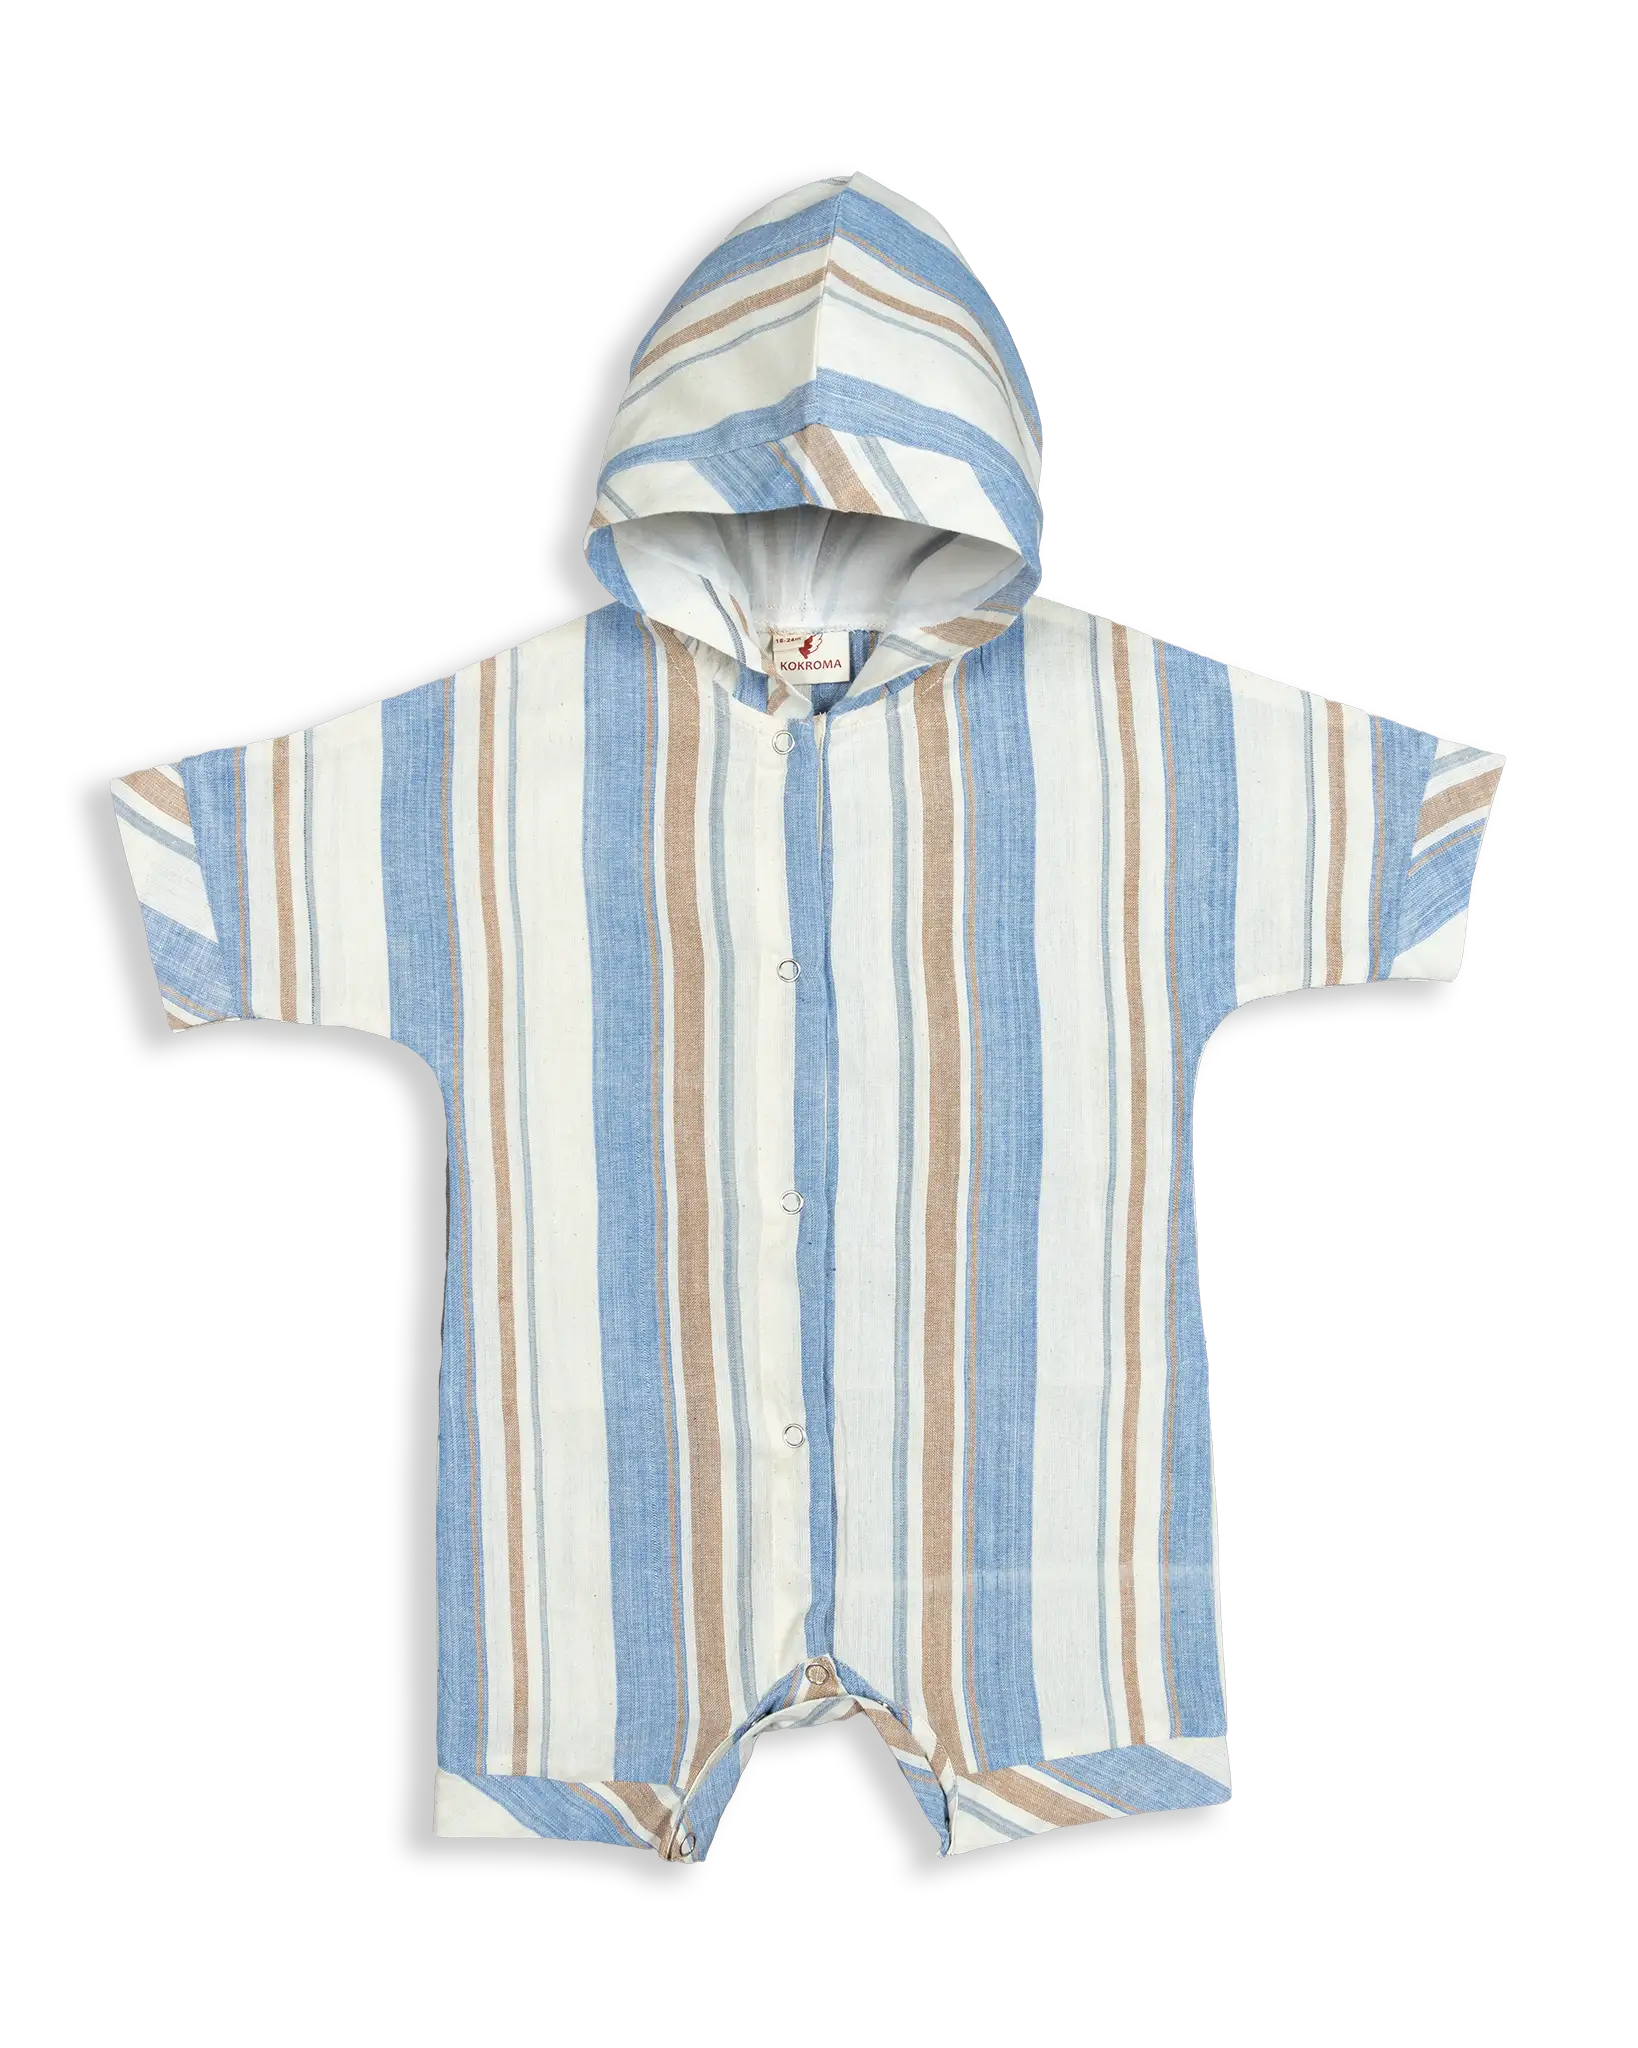 Soft, cozy, and oh-so-comfy! Sweet Pea Onesie is the perfect outfit for any occasion. Crafted from 100% cotton Stripe Woven Fabric and ethically made in Nepal, this onesie is sure to keep you snug and warm. With its modern design and classic style, you can be sure your little one will look as adorable as ever. Get your hands on the Sweet Pea Onesie today - it's the ideal way to keep your child comfortable!